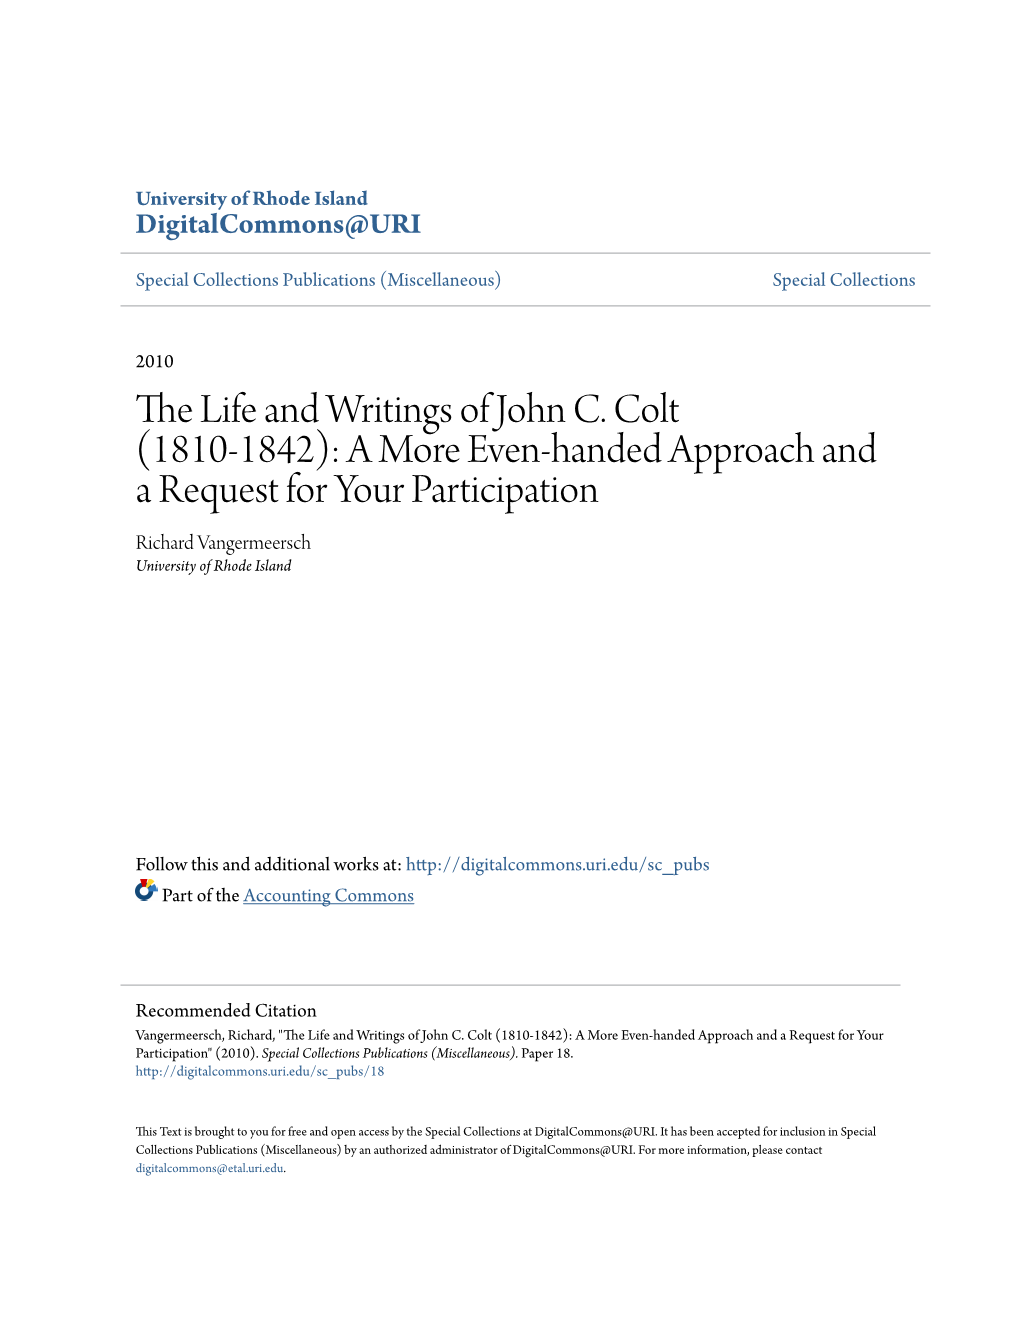 The Life and Writings of John C. Colt (1810-1842): a More Even-Handed Approach and a Request for Your Participation Richard Vangermeersch University of Rhode Island